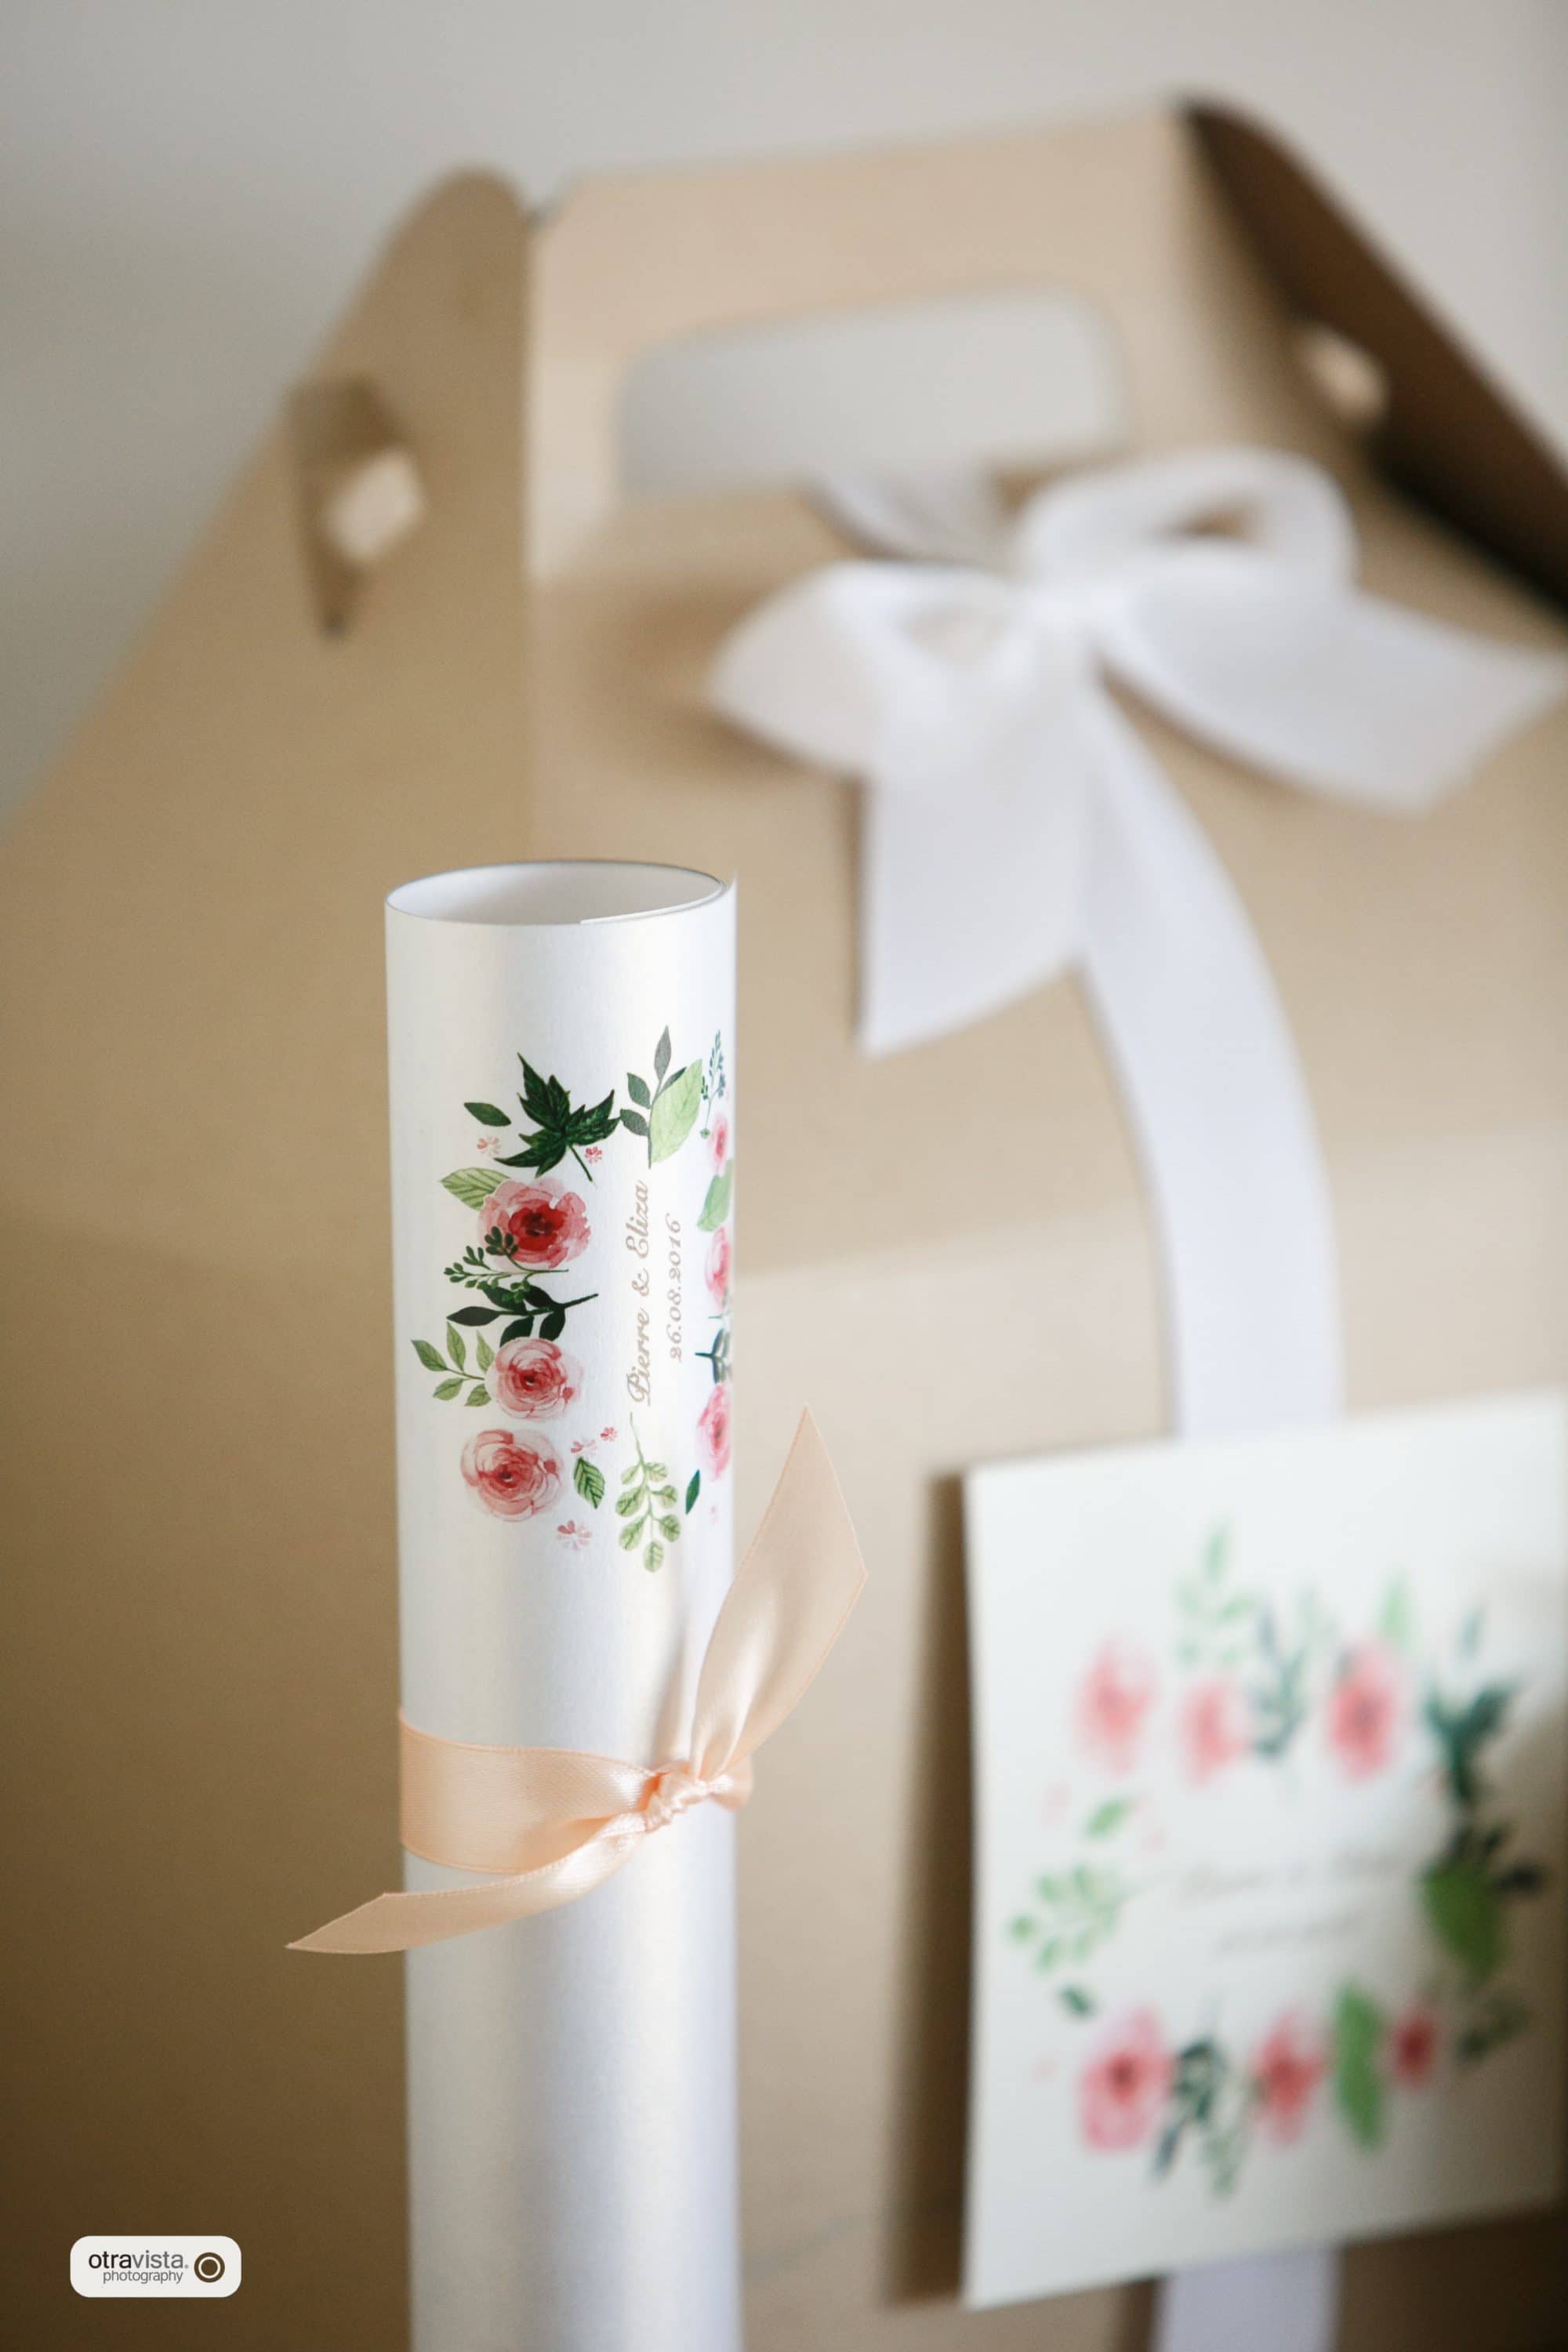 Original ideas for wedding guests' gifts